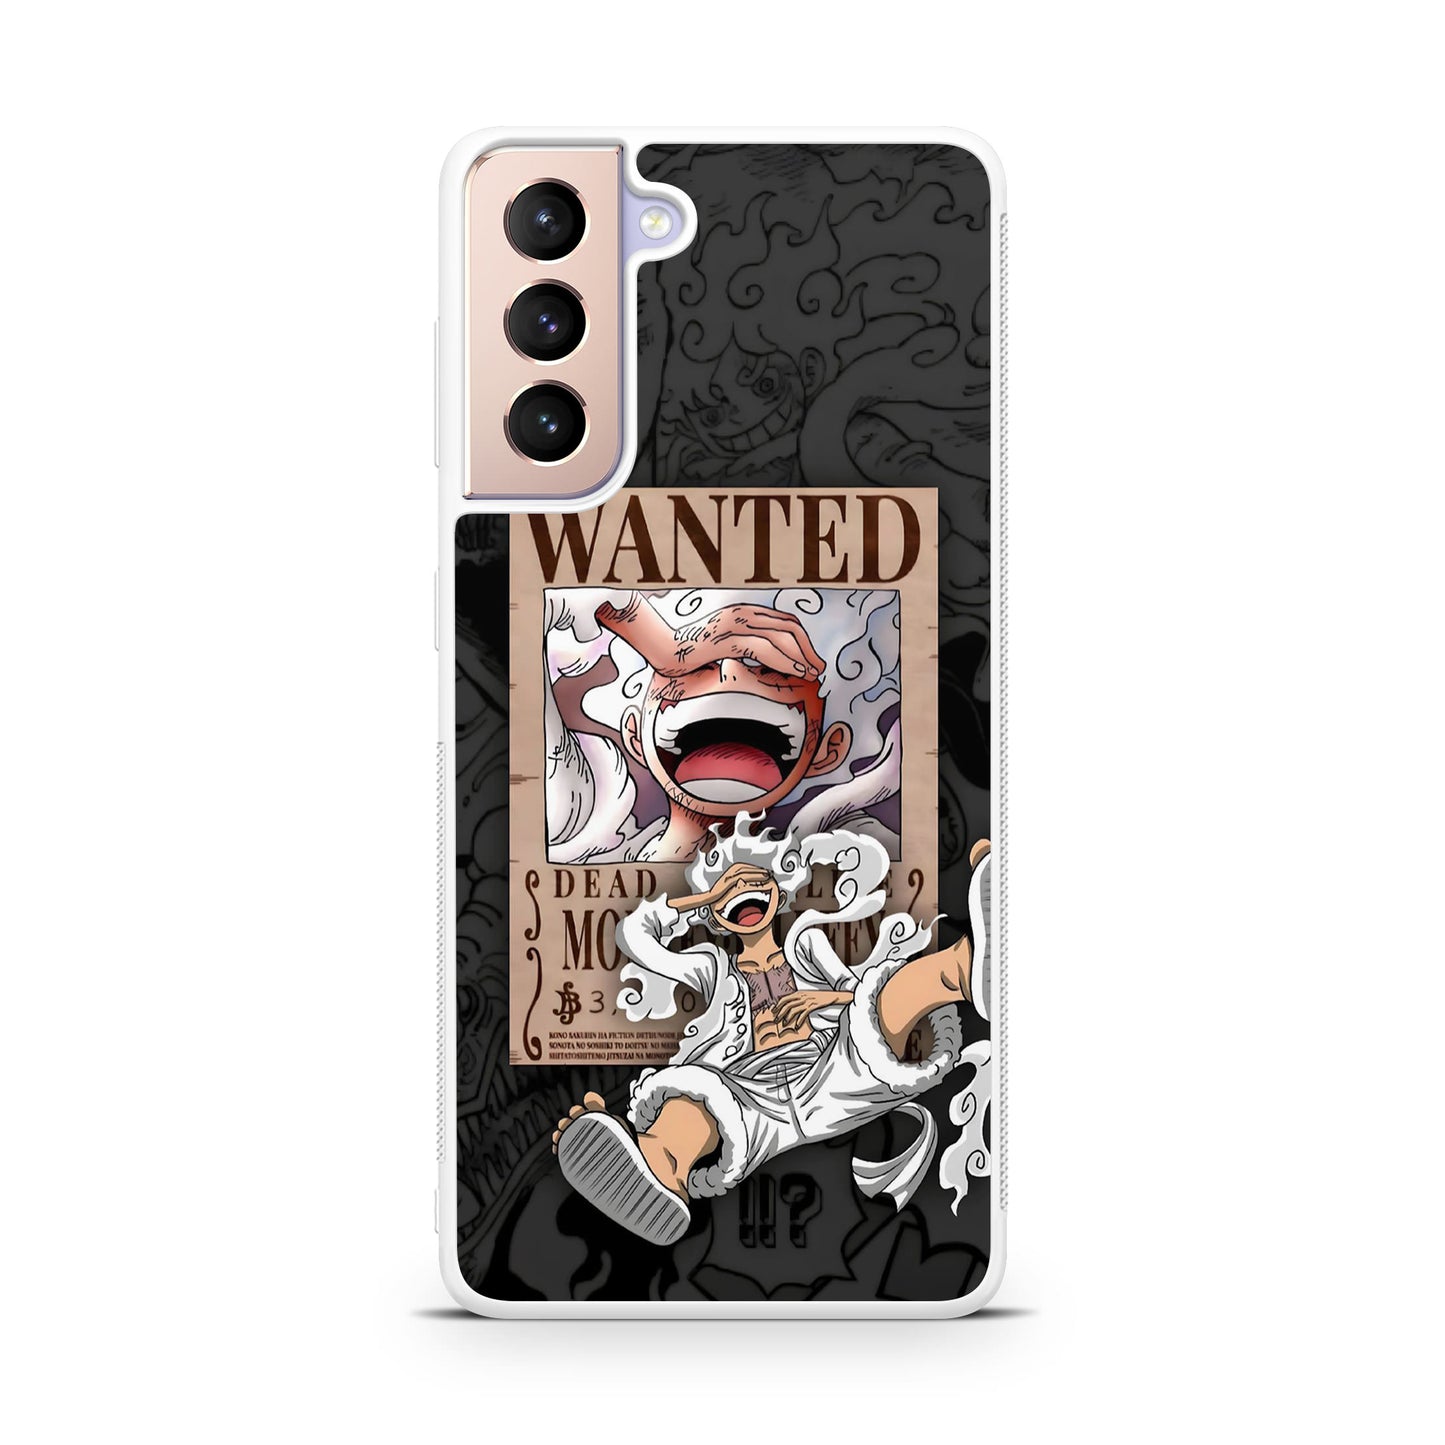 Gear 5 With Poster Galaxy S21 / S21 Plus / S21 FE 5G Case